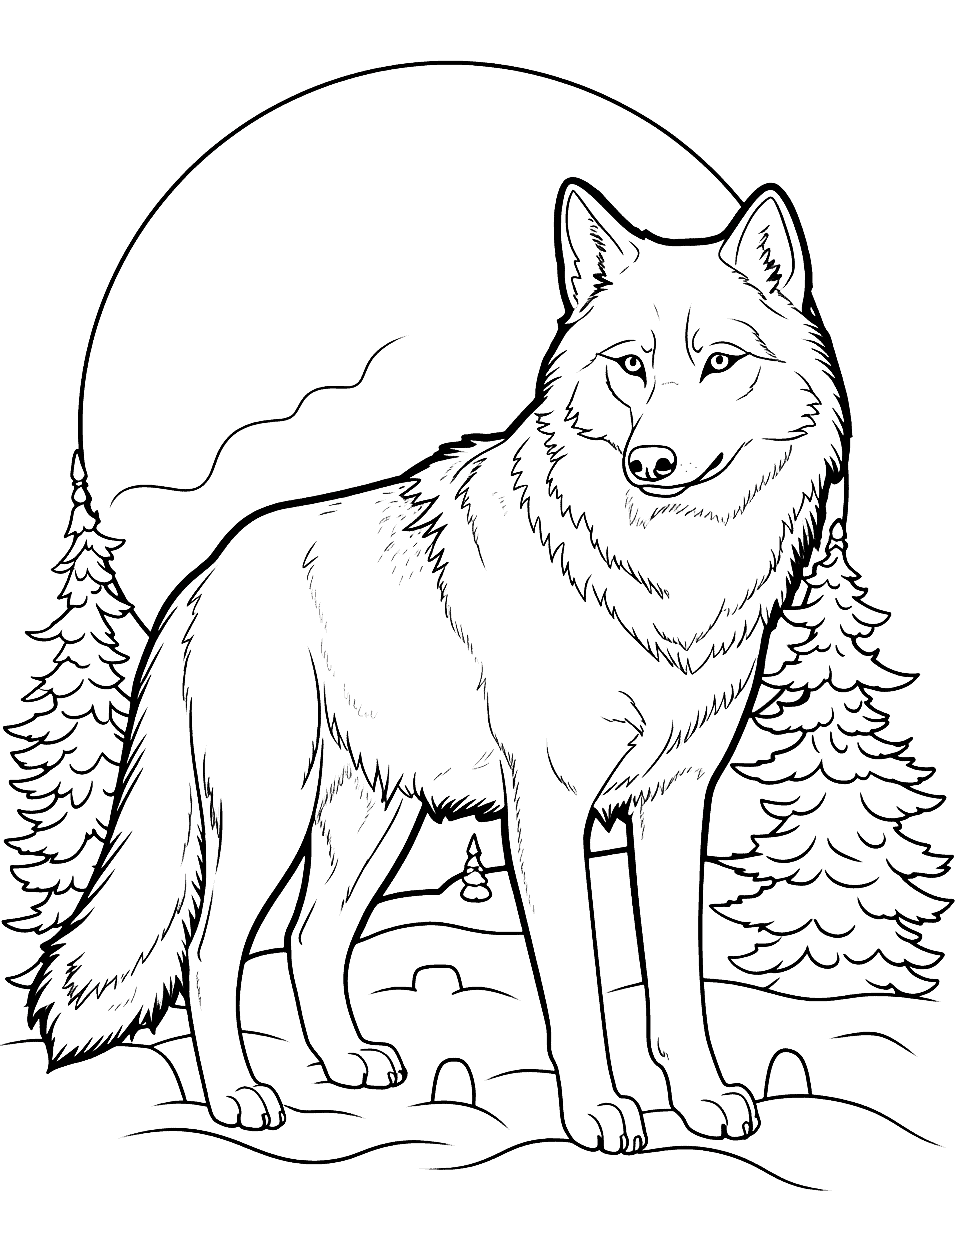 Snow Wolf Hunt Coloring Page - A wolf stalking its prey amidst a winter wonderland.